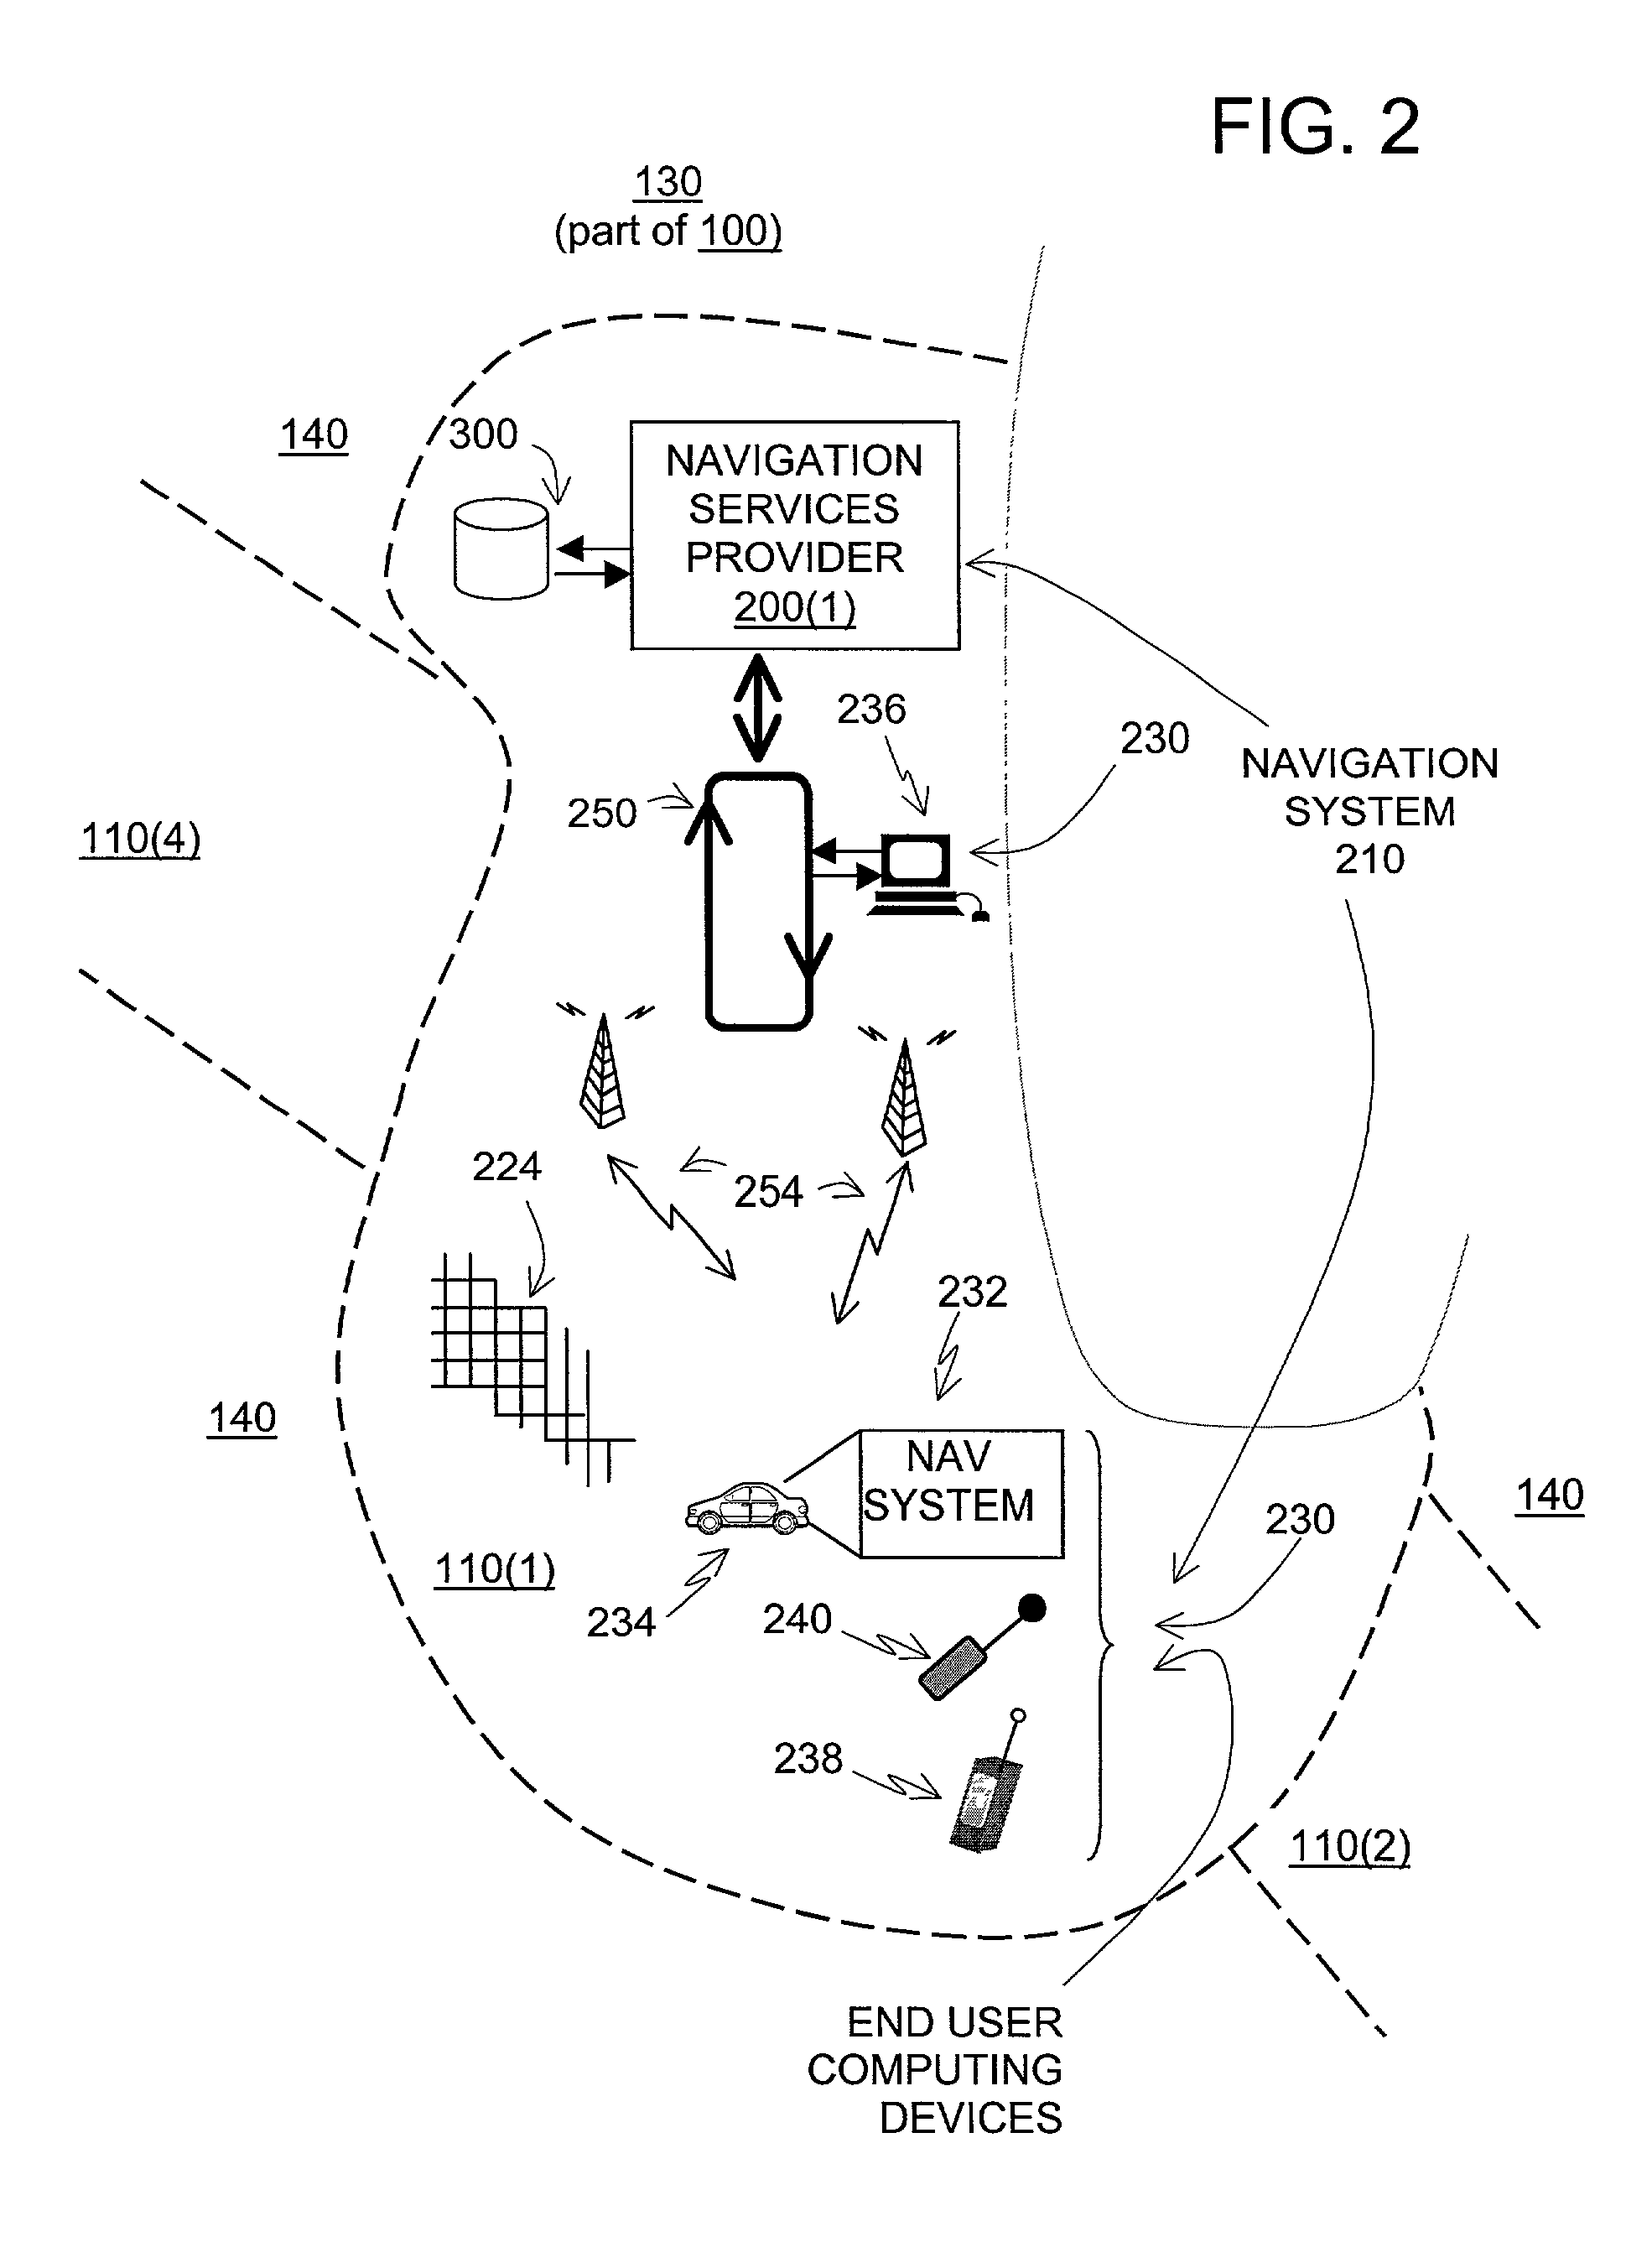 Geographic database including data indicating wireless coverage and method and system for use thereof